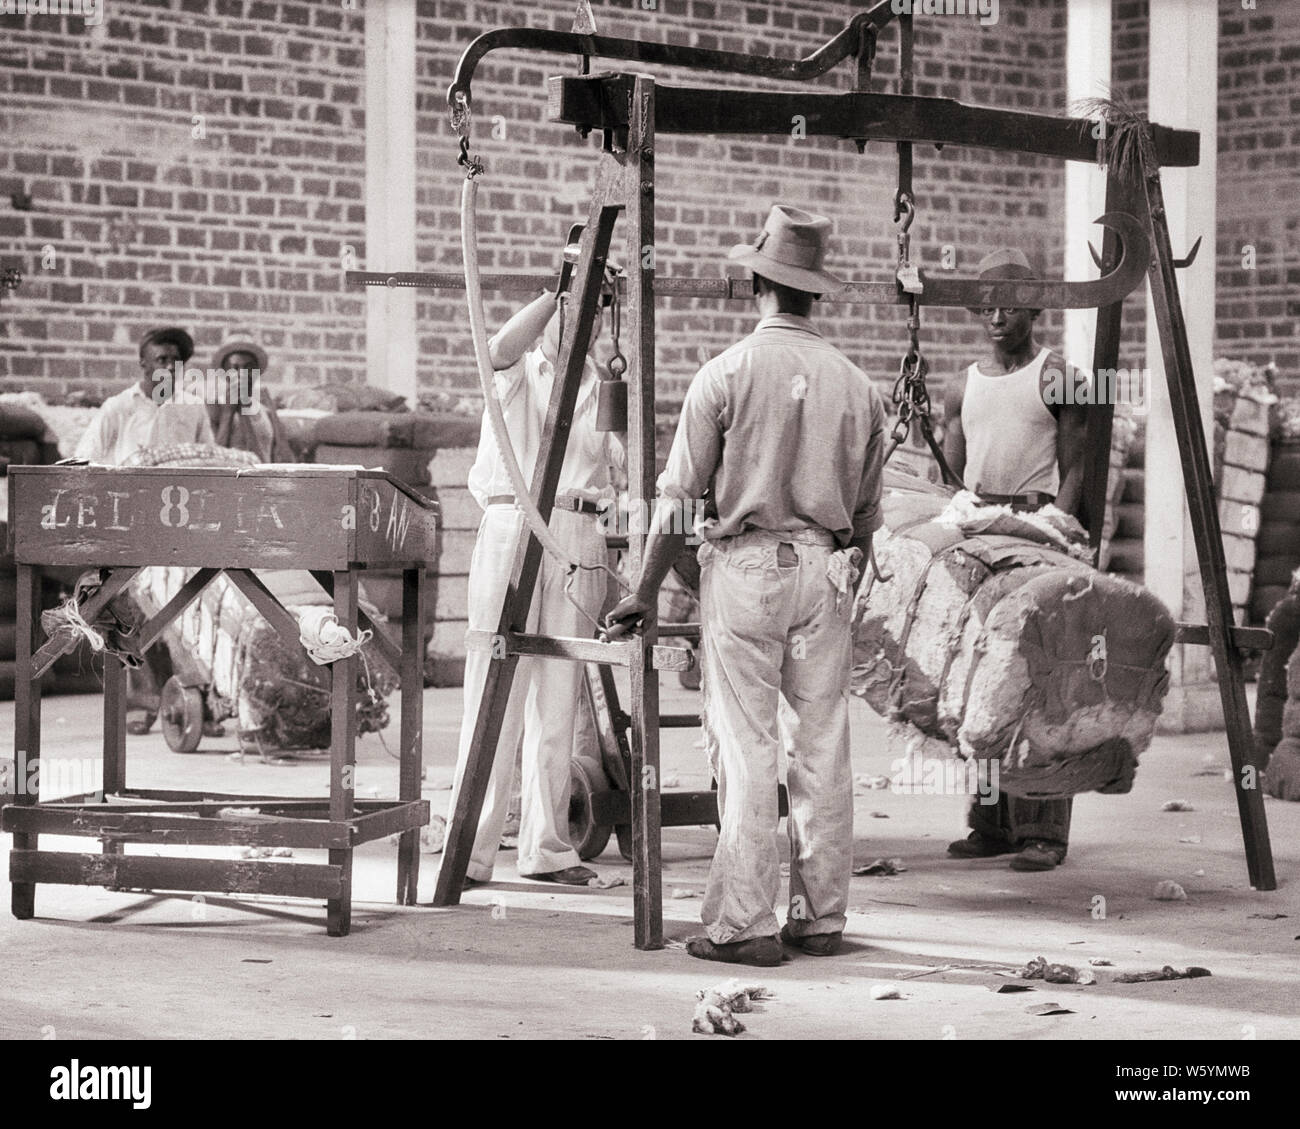 1930s THREE MEN STANDING AT INDUSTRIAL SCALE WEIGHING BALES OF PICKED COTTON NEW ORLEANS LOUISIANA USA - c6273 HAR001 HARS MALES PROFESSION EXECUTIVES WEIGHING AGRICULTURE B&W WIDE ANGLE SKILL OCCUPATION SKILLS STRENGTH AFRICAN-AMERICANS AFRICAN-AMERICAN CAREERS BLACK ETHNICITY LABOR LOUISIANA AT OF SUPERVISOR AUTHORITY OCCUPATIONS PICKED BOSSES CONCEPTUAL MANAGERS MID-ADULT MID-ADULT MAN BALES BLACK AND WHITE CAUCASIAN ETHNICITY HAR001 LA NEW ORLEANS OLD FASHIONED AFRICAN AMERICANS Stock Photo